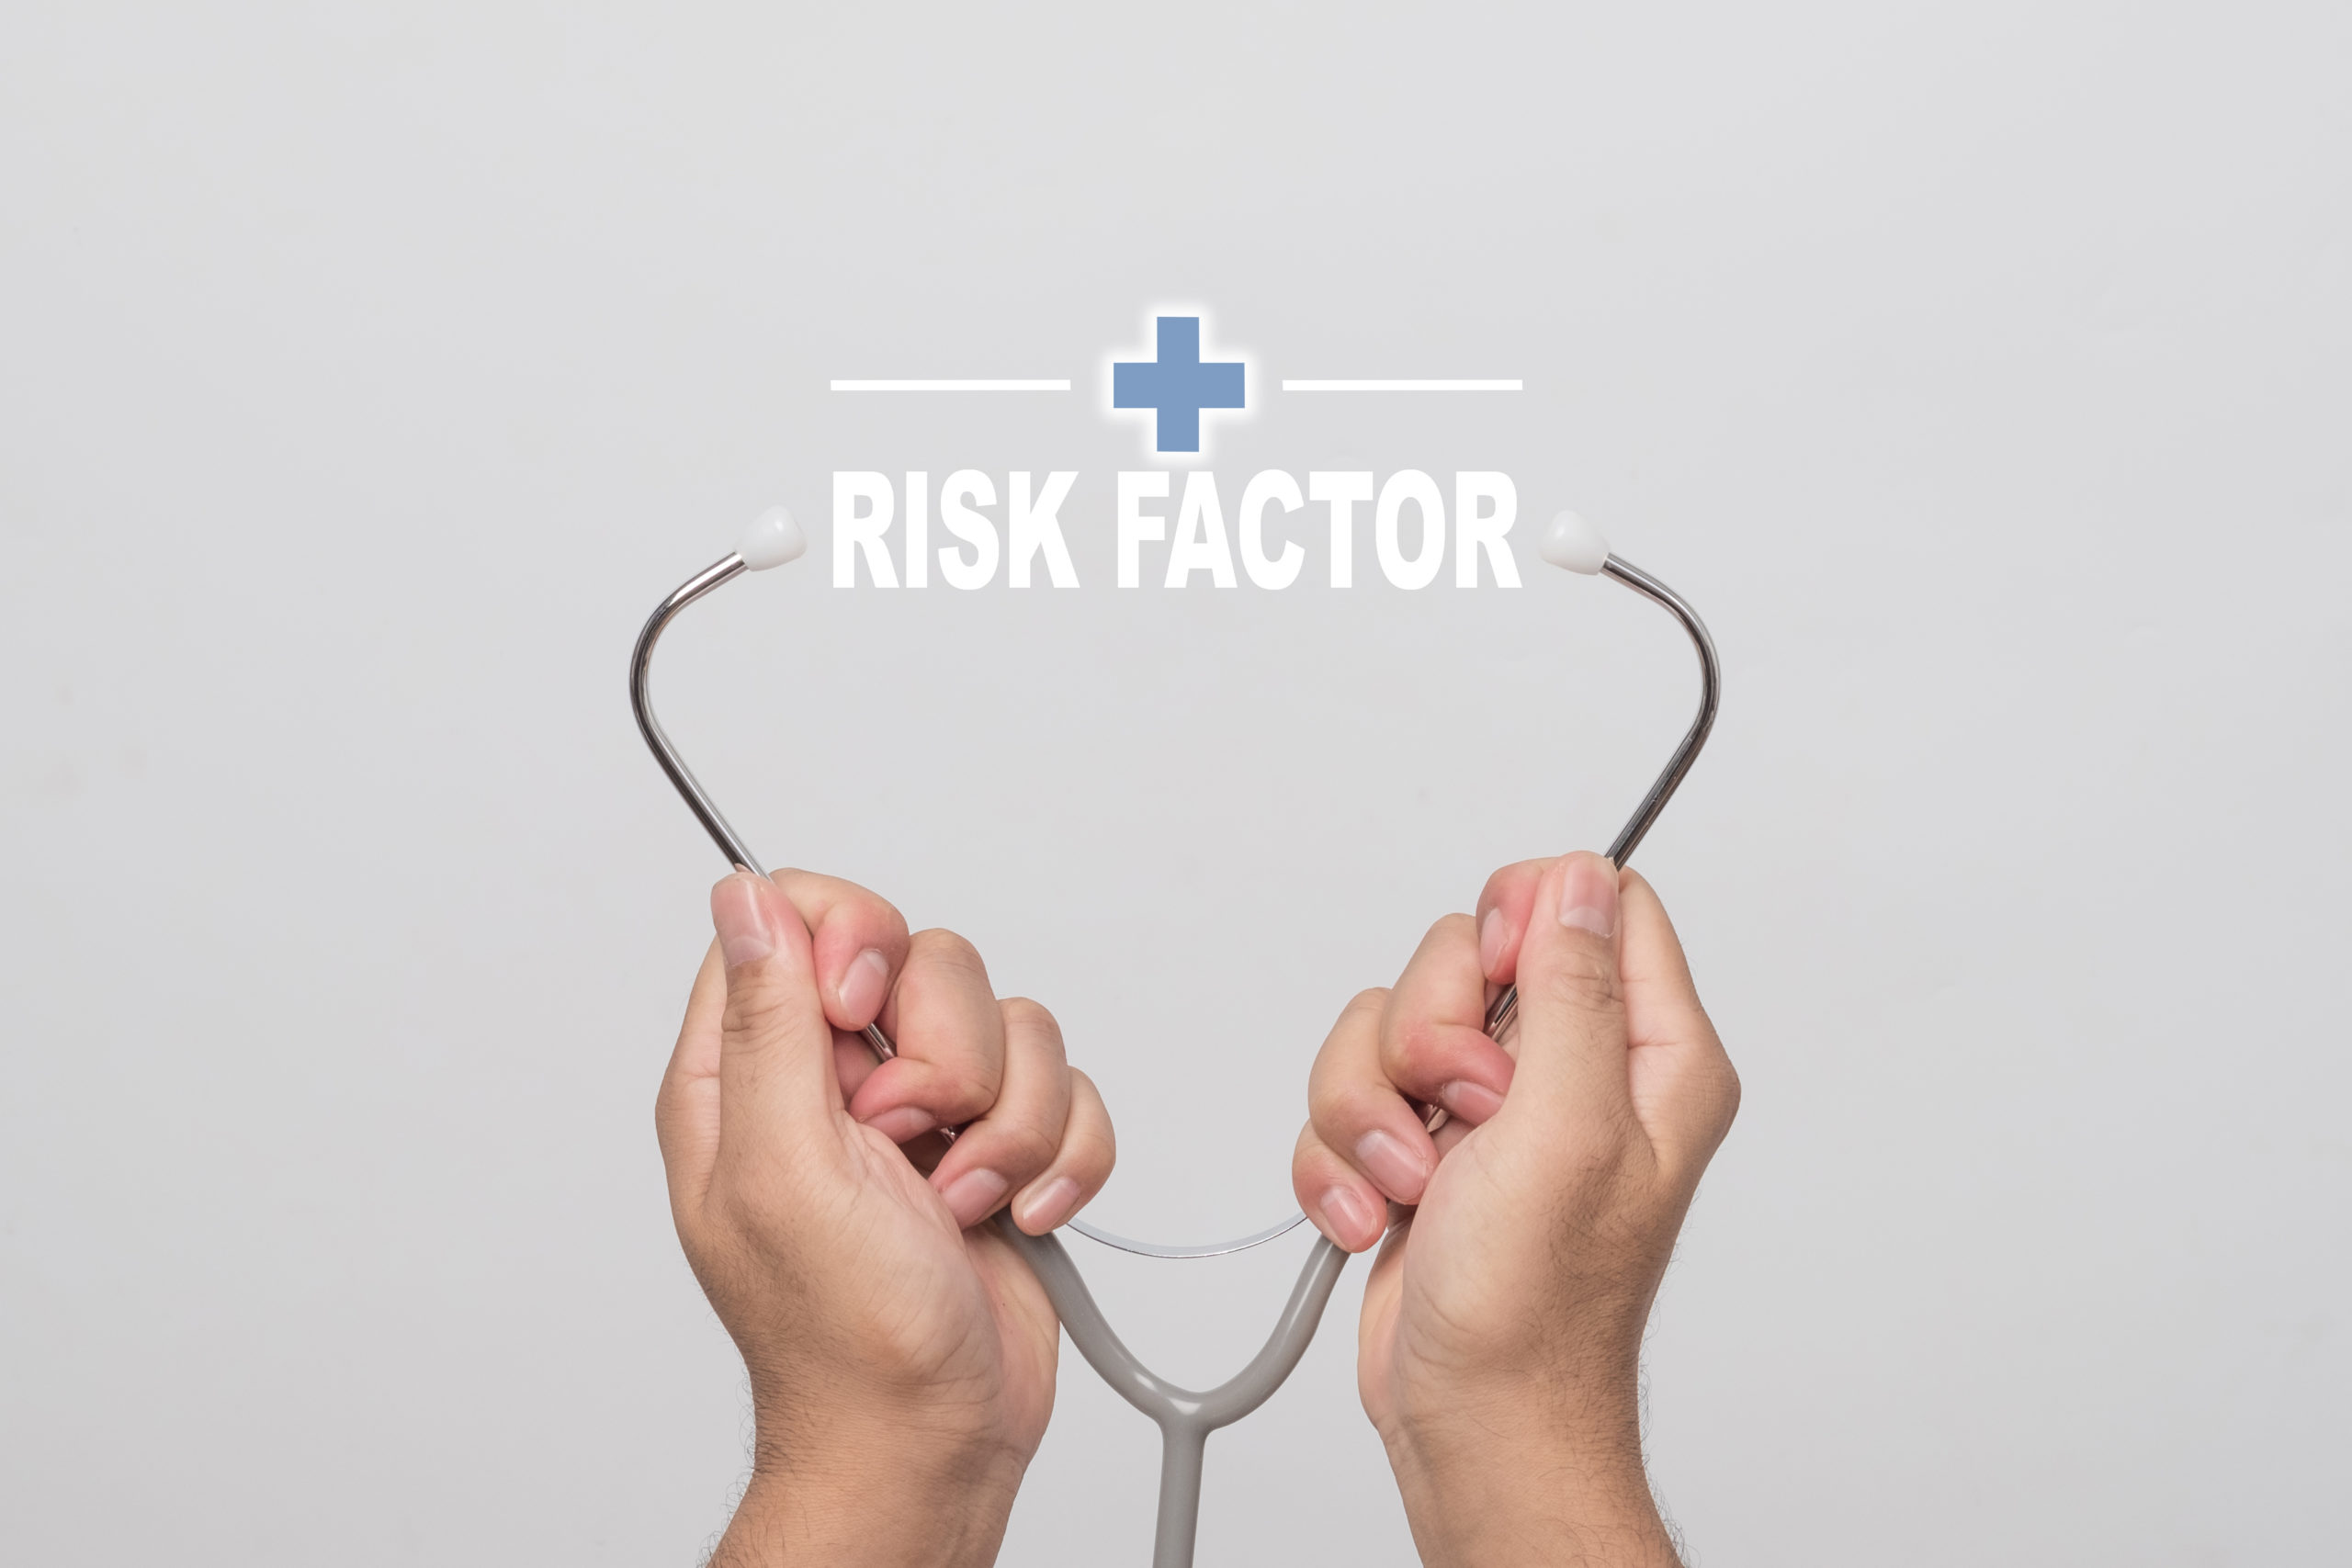 Hands holding a stethoscope and word "RISK FACTOR" medical concept.